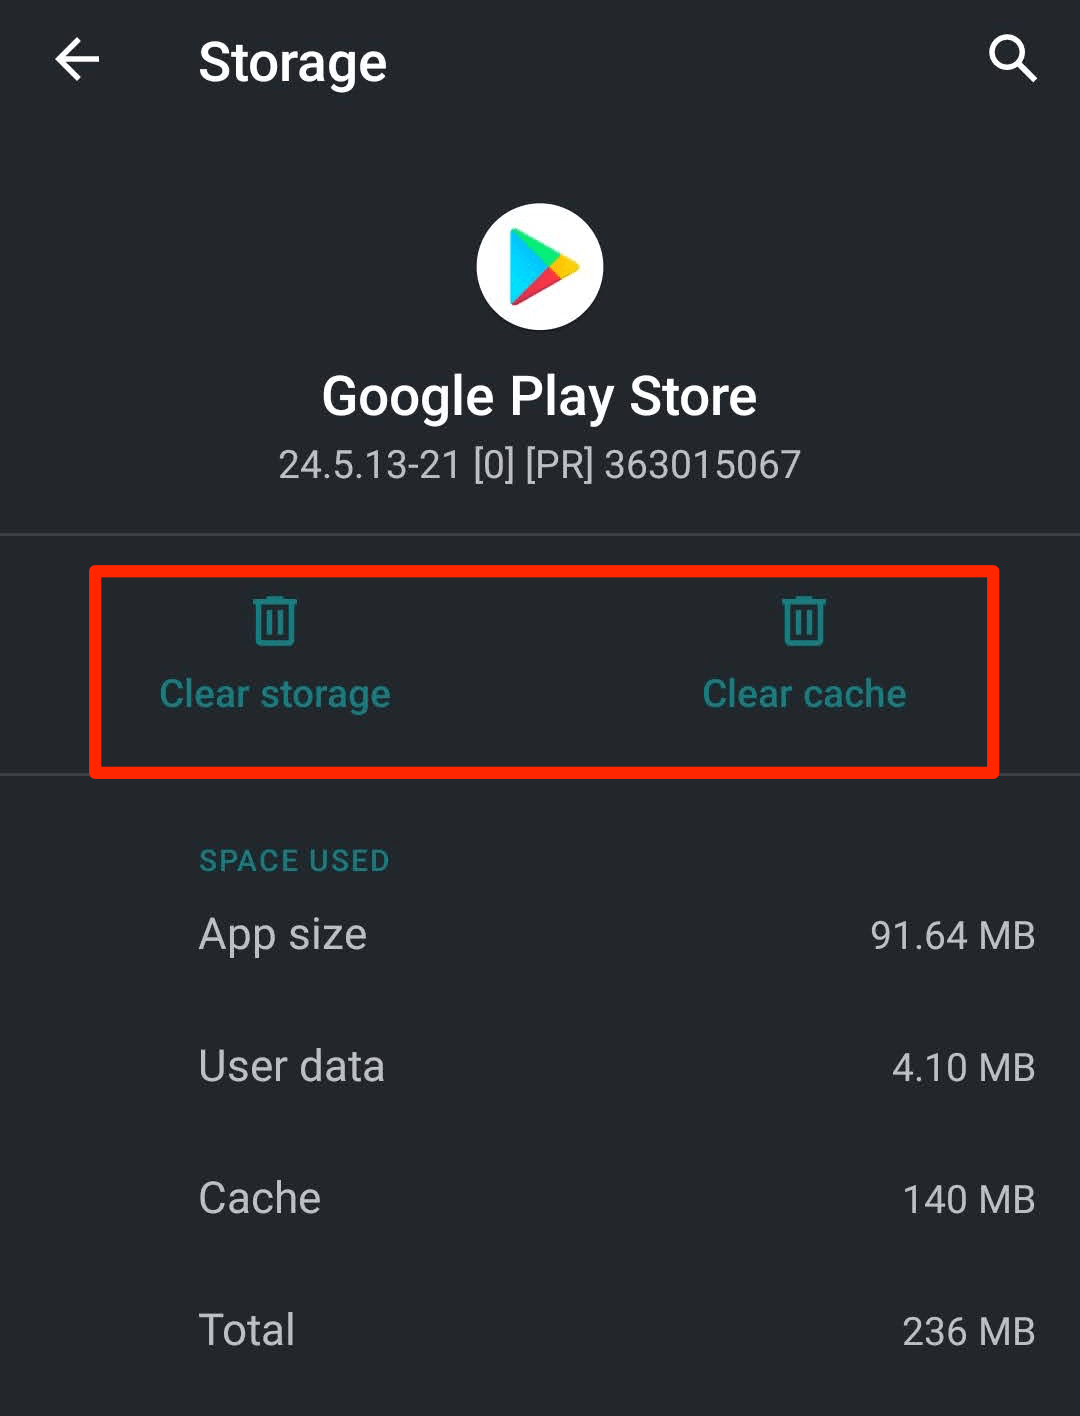 Google Play Store Clear Cache and Clear Storage button